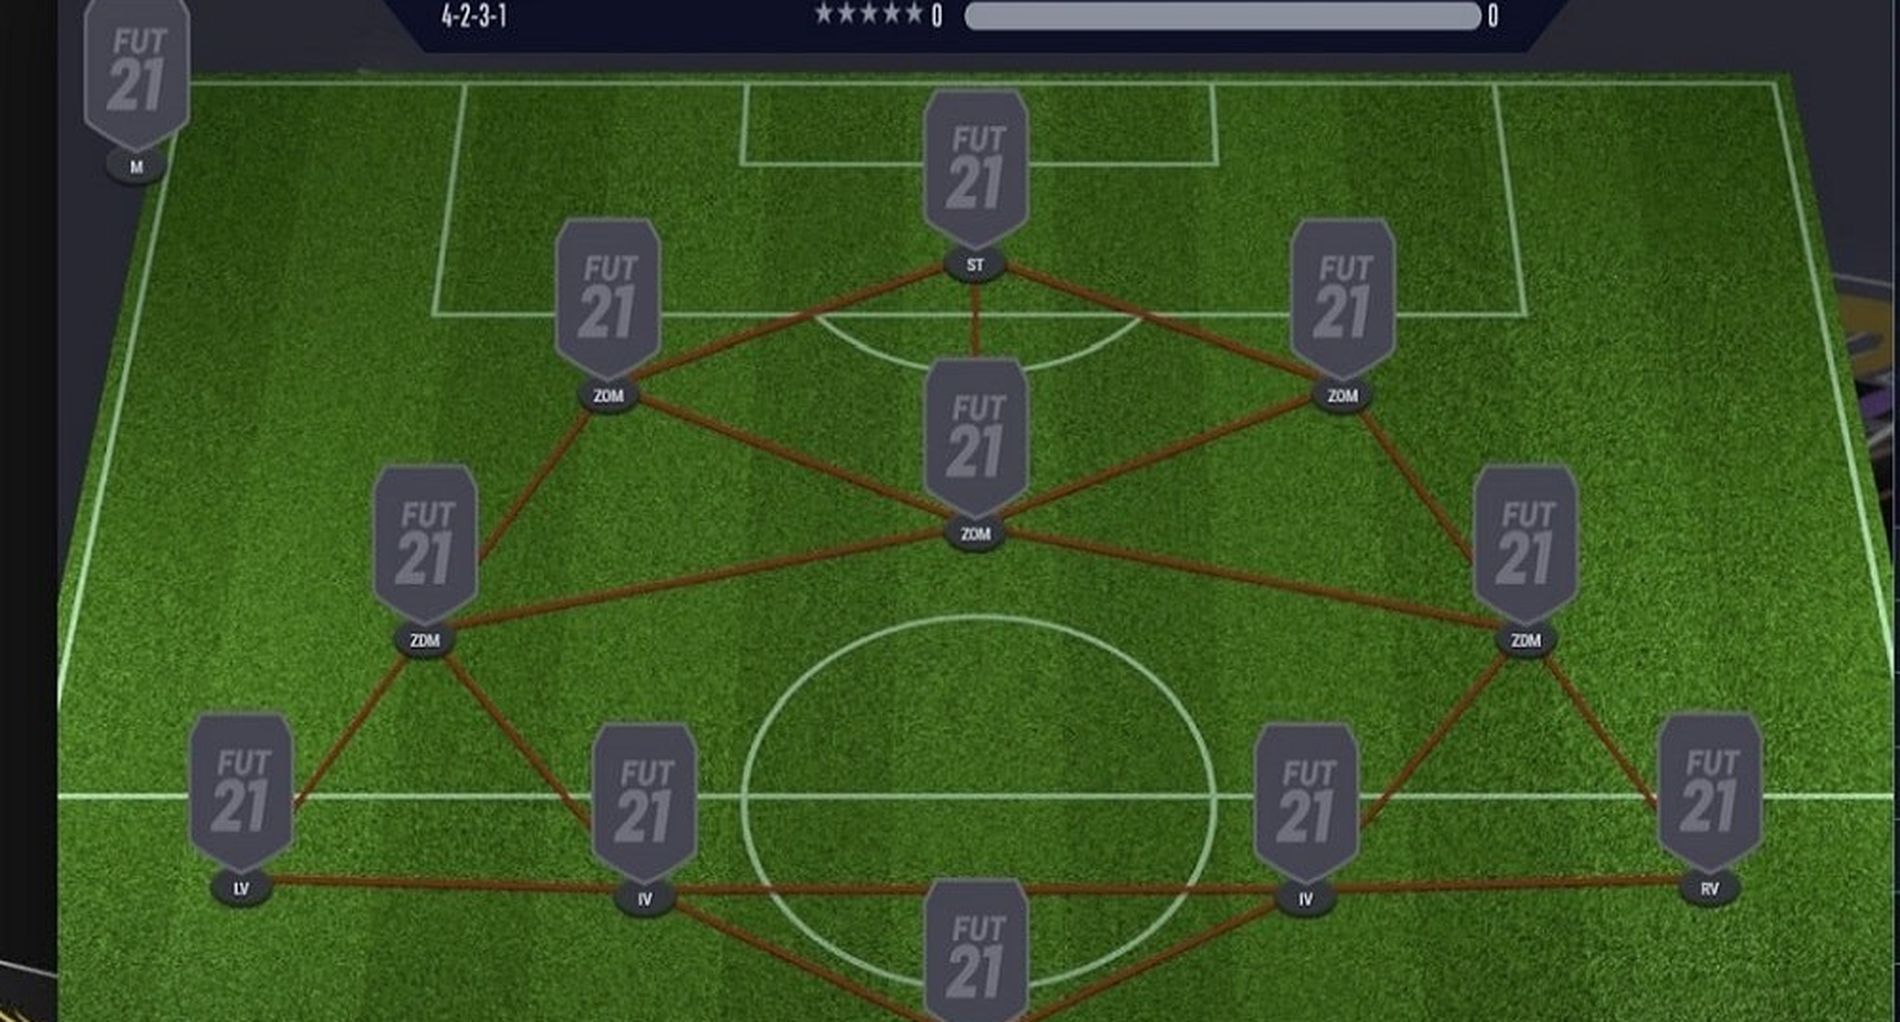 Fifa21 Ultimate Team Formation Guide 4 2 3 1 Gamers Academy Gamers Academy